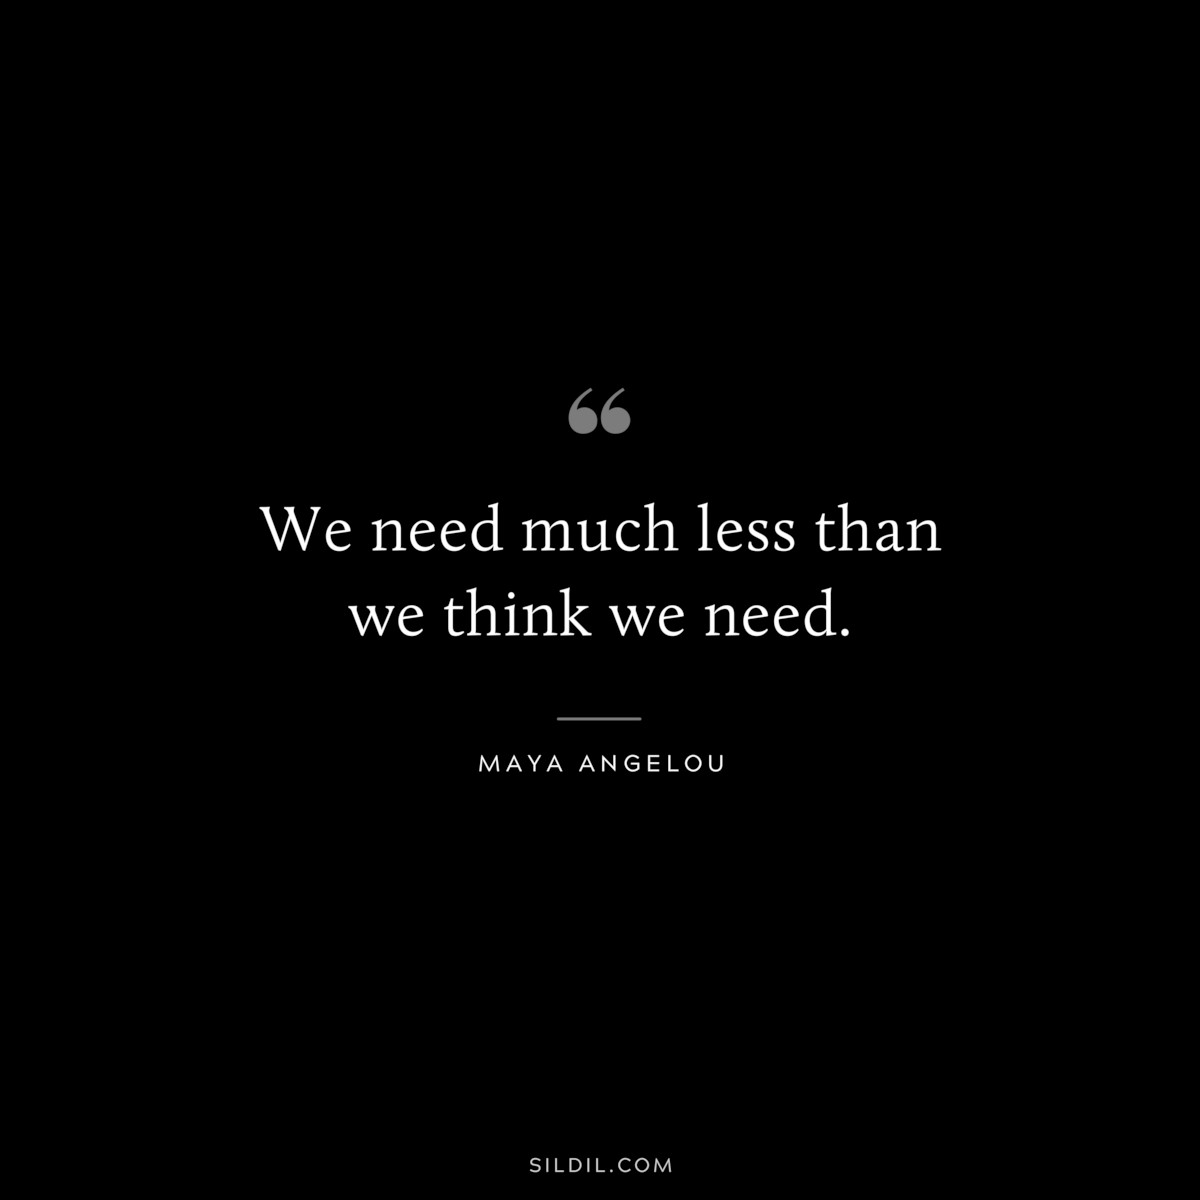 We need much less than we think we need. ― Maya Angelou